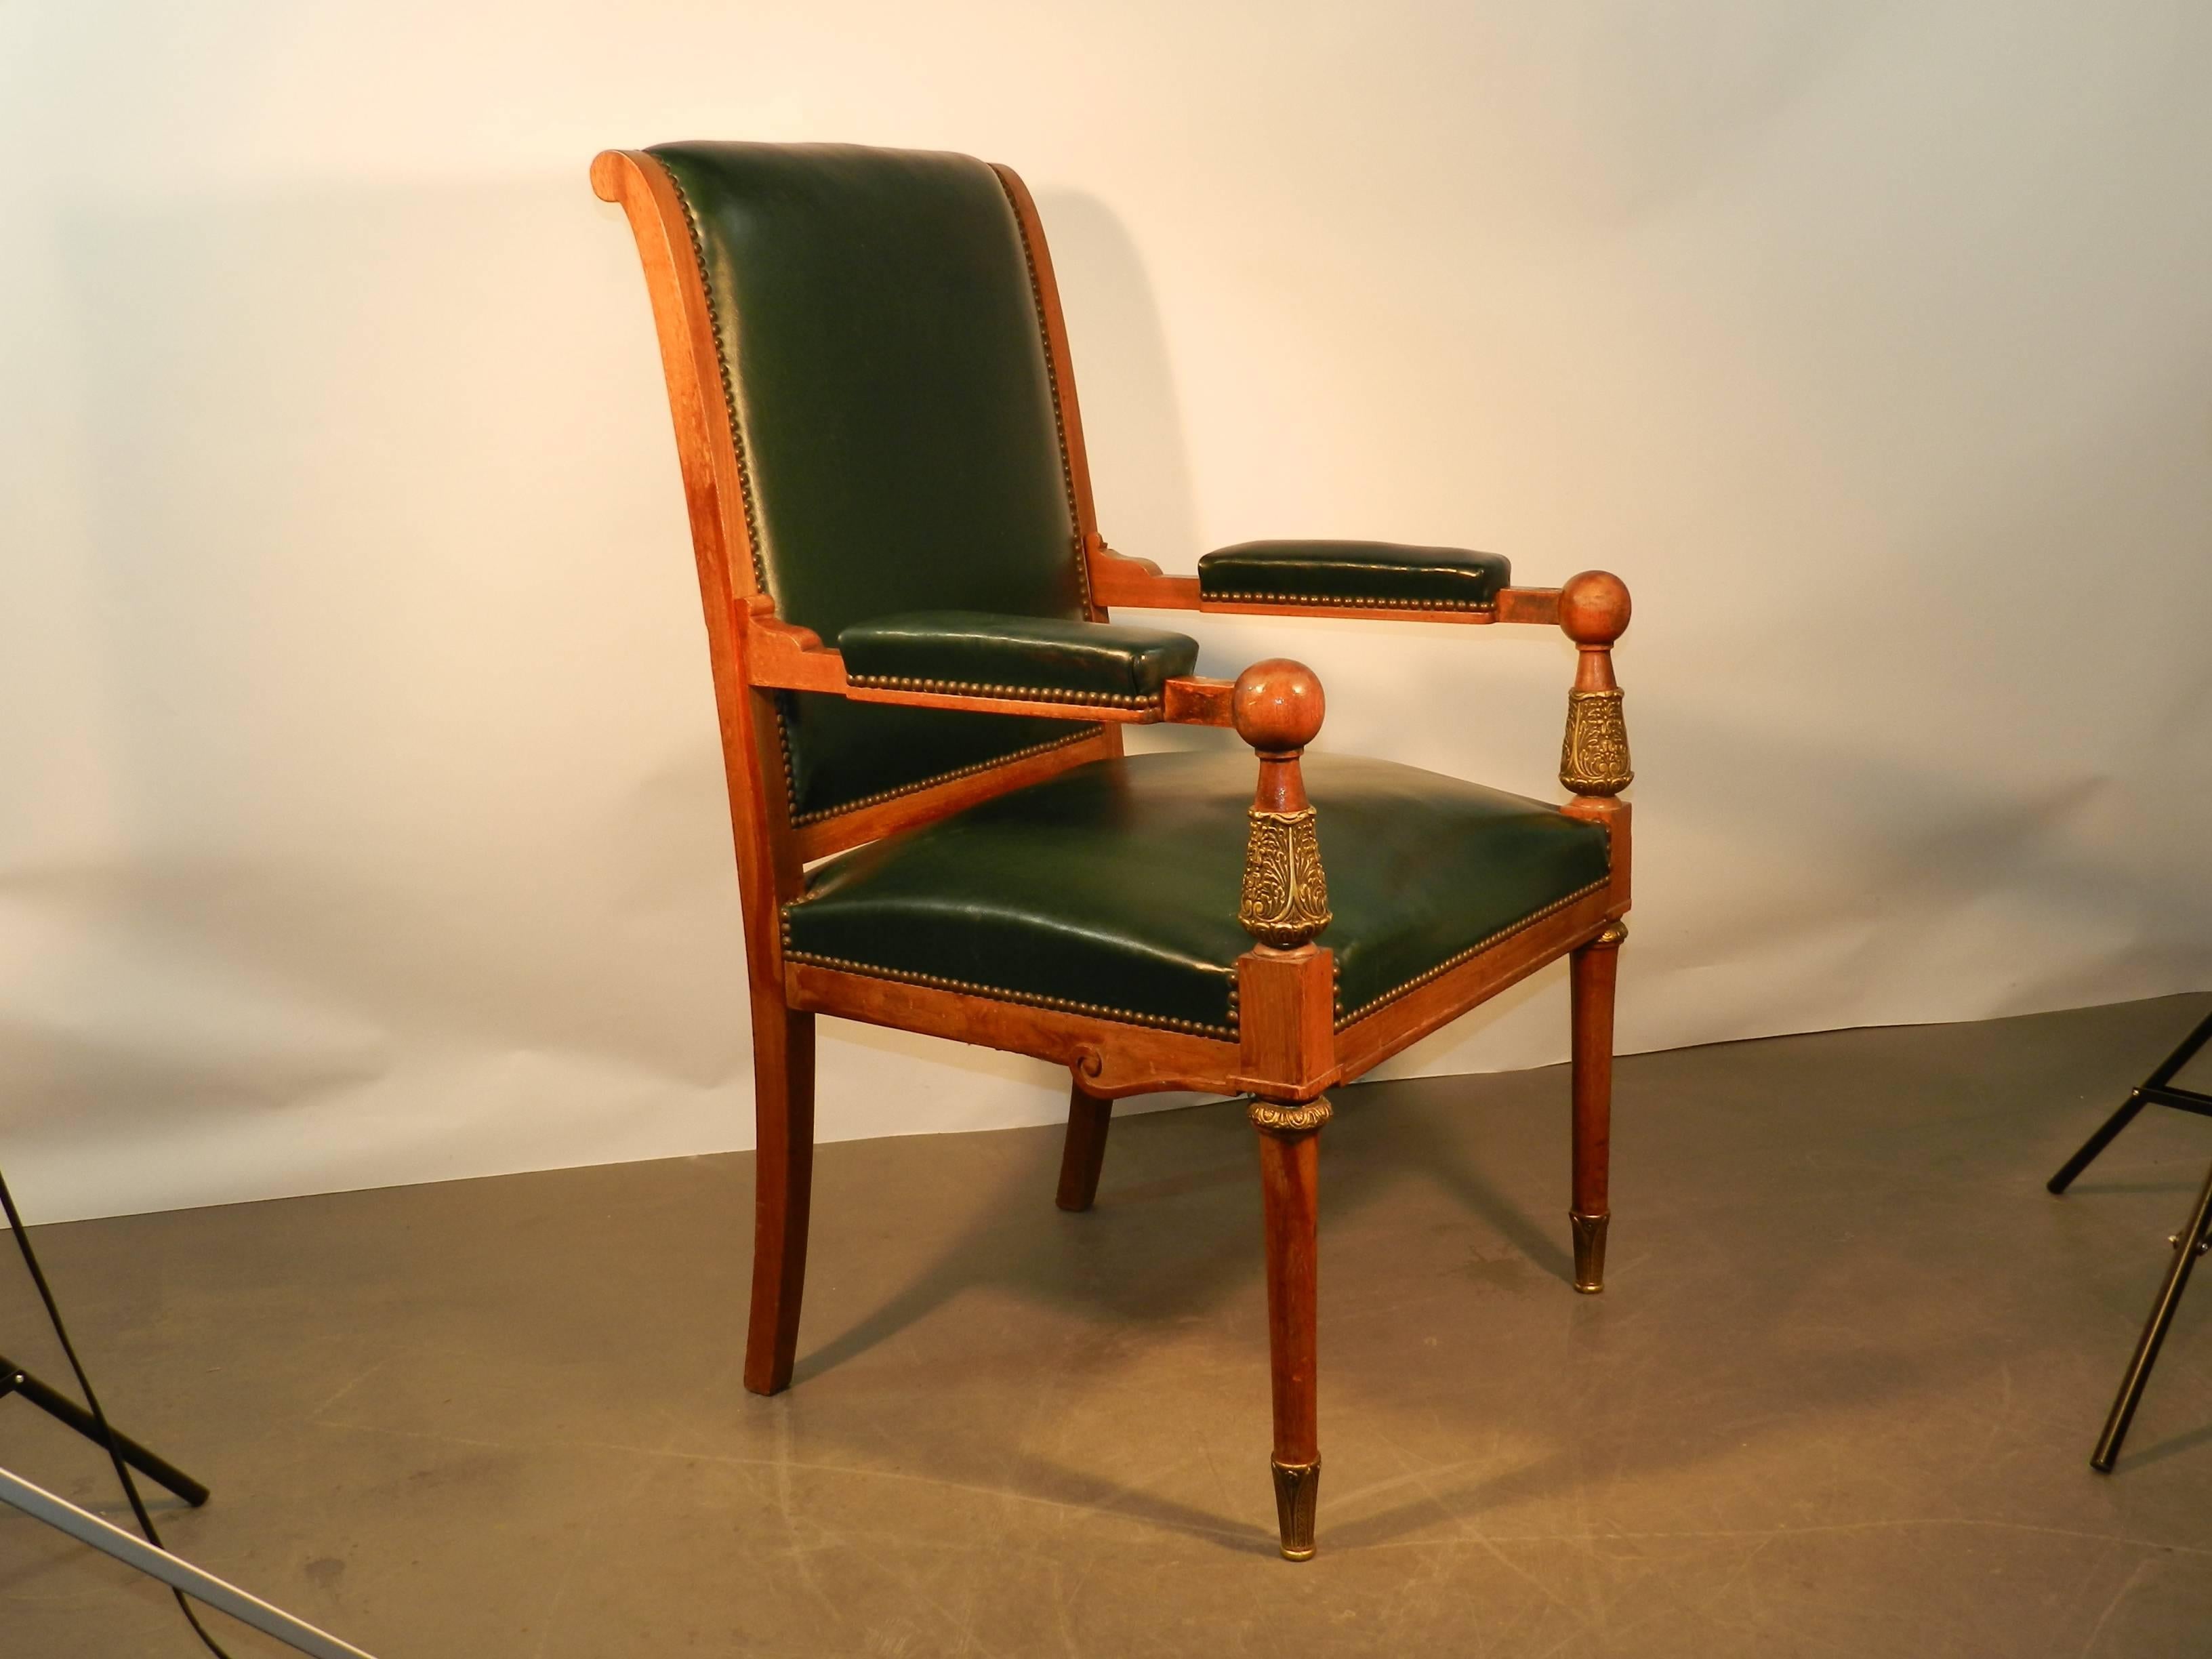 Large neoclassical desk armchair, circa 1950.
To be revarnished and reupholstered.